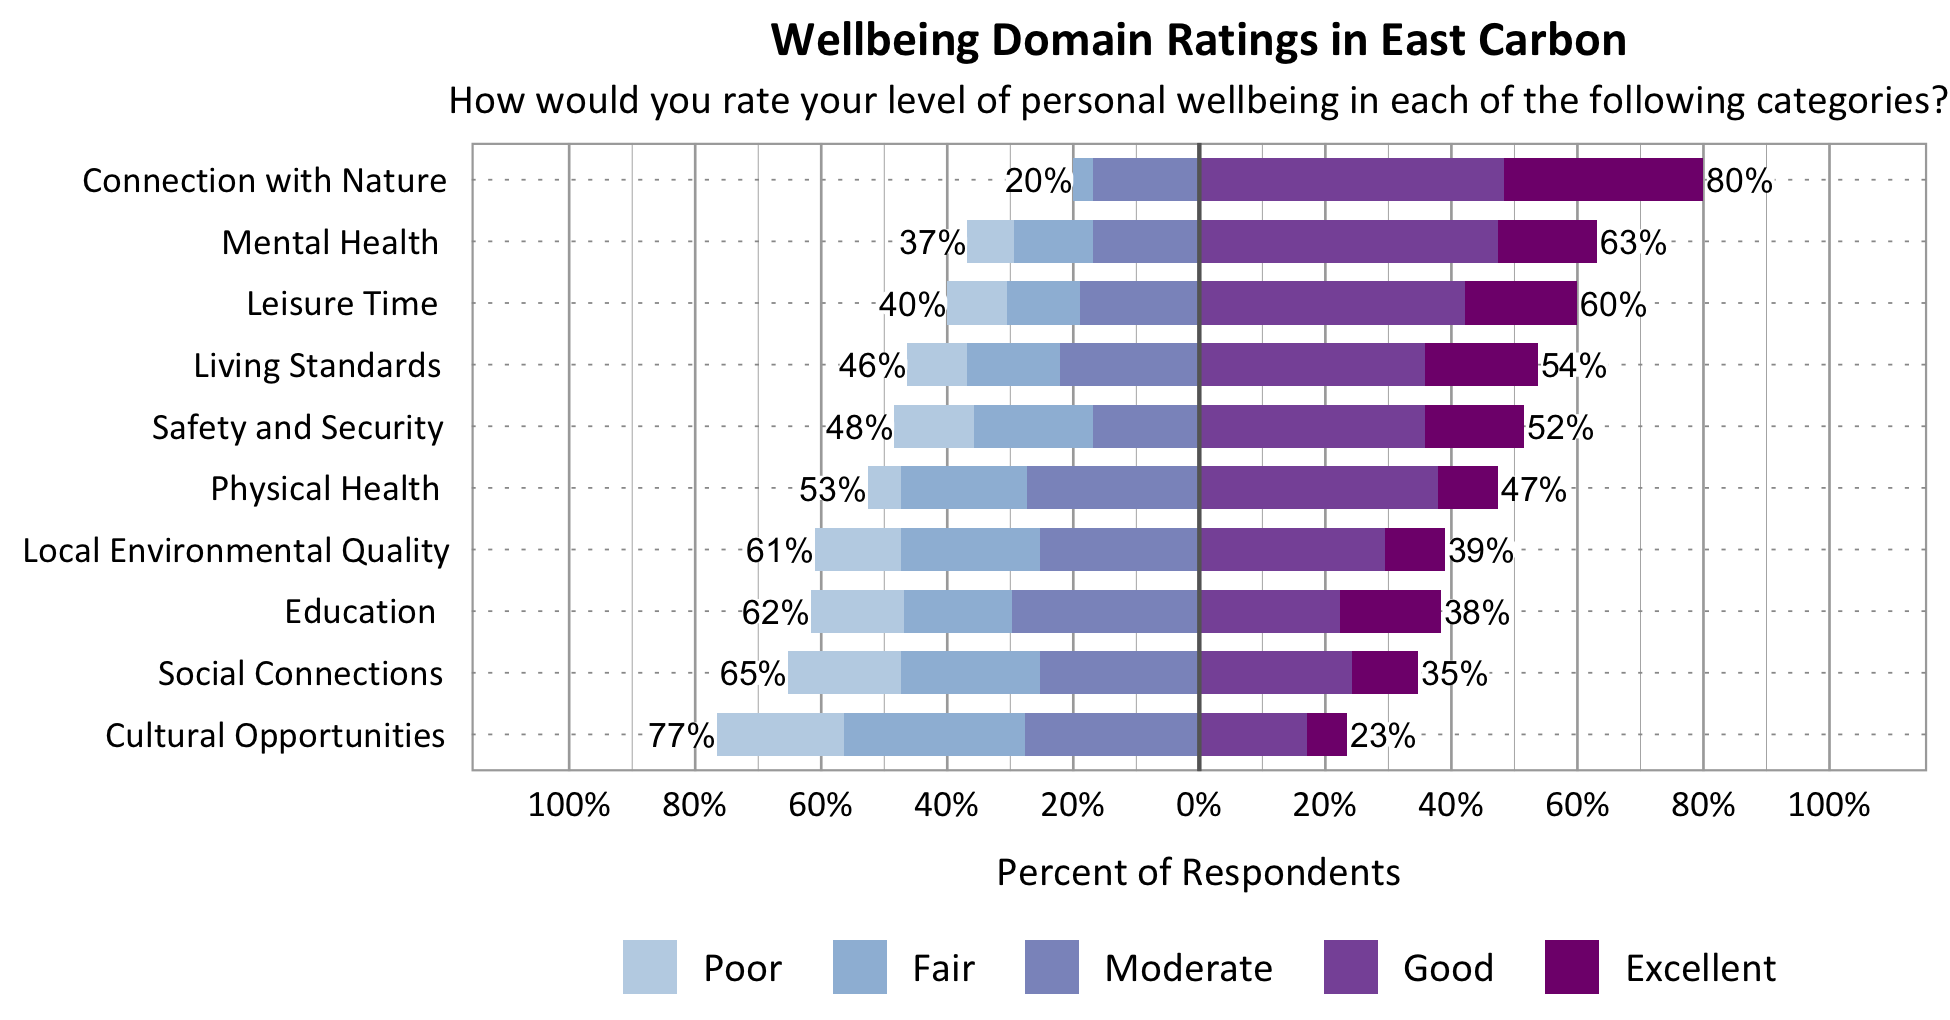 Likert Graph. Title: Wellbeing Domain Ratings in East Carbon. Subtitle: How would you rate your level of personal wellbeing in each of the following categories? Category: Safety and Security - 48% of respondents rated as poor, fair, or moderate while 52% rated as good or excellent; Category: Living Standards - 46% of respondents rated as poor, fair, or moderate while 54% rated as good or excellent; Category: Education - 62% of respondents rated as poor, fair, or moderate while 38% rated as good or excellent; Category: Connection with Nature - 20% of respondents rated as poor, fair, or moderate while 80% rated as good or excellent; Category: Mental Health - 37% of respondents rated as poor, fair, or moderate while 63% rated as good or excellent; Category: Local Environmental Quality - 61% of respondents rated as poor, fair, or moderate while 39% rated as good or excellent; Category: Physical Health - 53% of respondents rated as poor, fair, or moderate while 47% rated as good or excellent; Category: Leisure Time - 40% of respondents rated as poor, fair or moderate while 60% rated as good or excellent; Category: Social Connections - 65% of respondents rated as poor, fair, or moderate while 35% rated as good or excellent; Category: Cultural Opportunities - 77% of respondents rated as poor, fair or moderate while 23% rated as good or excellent.